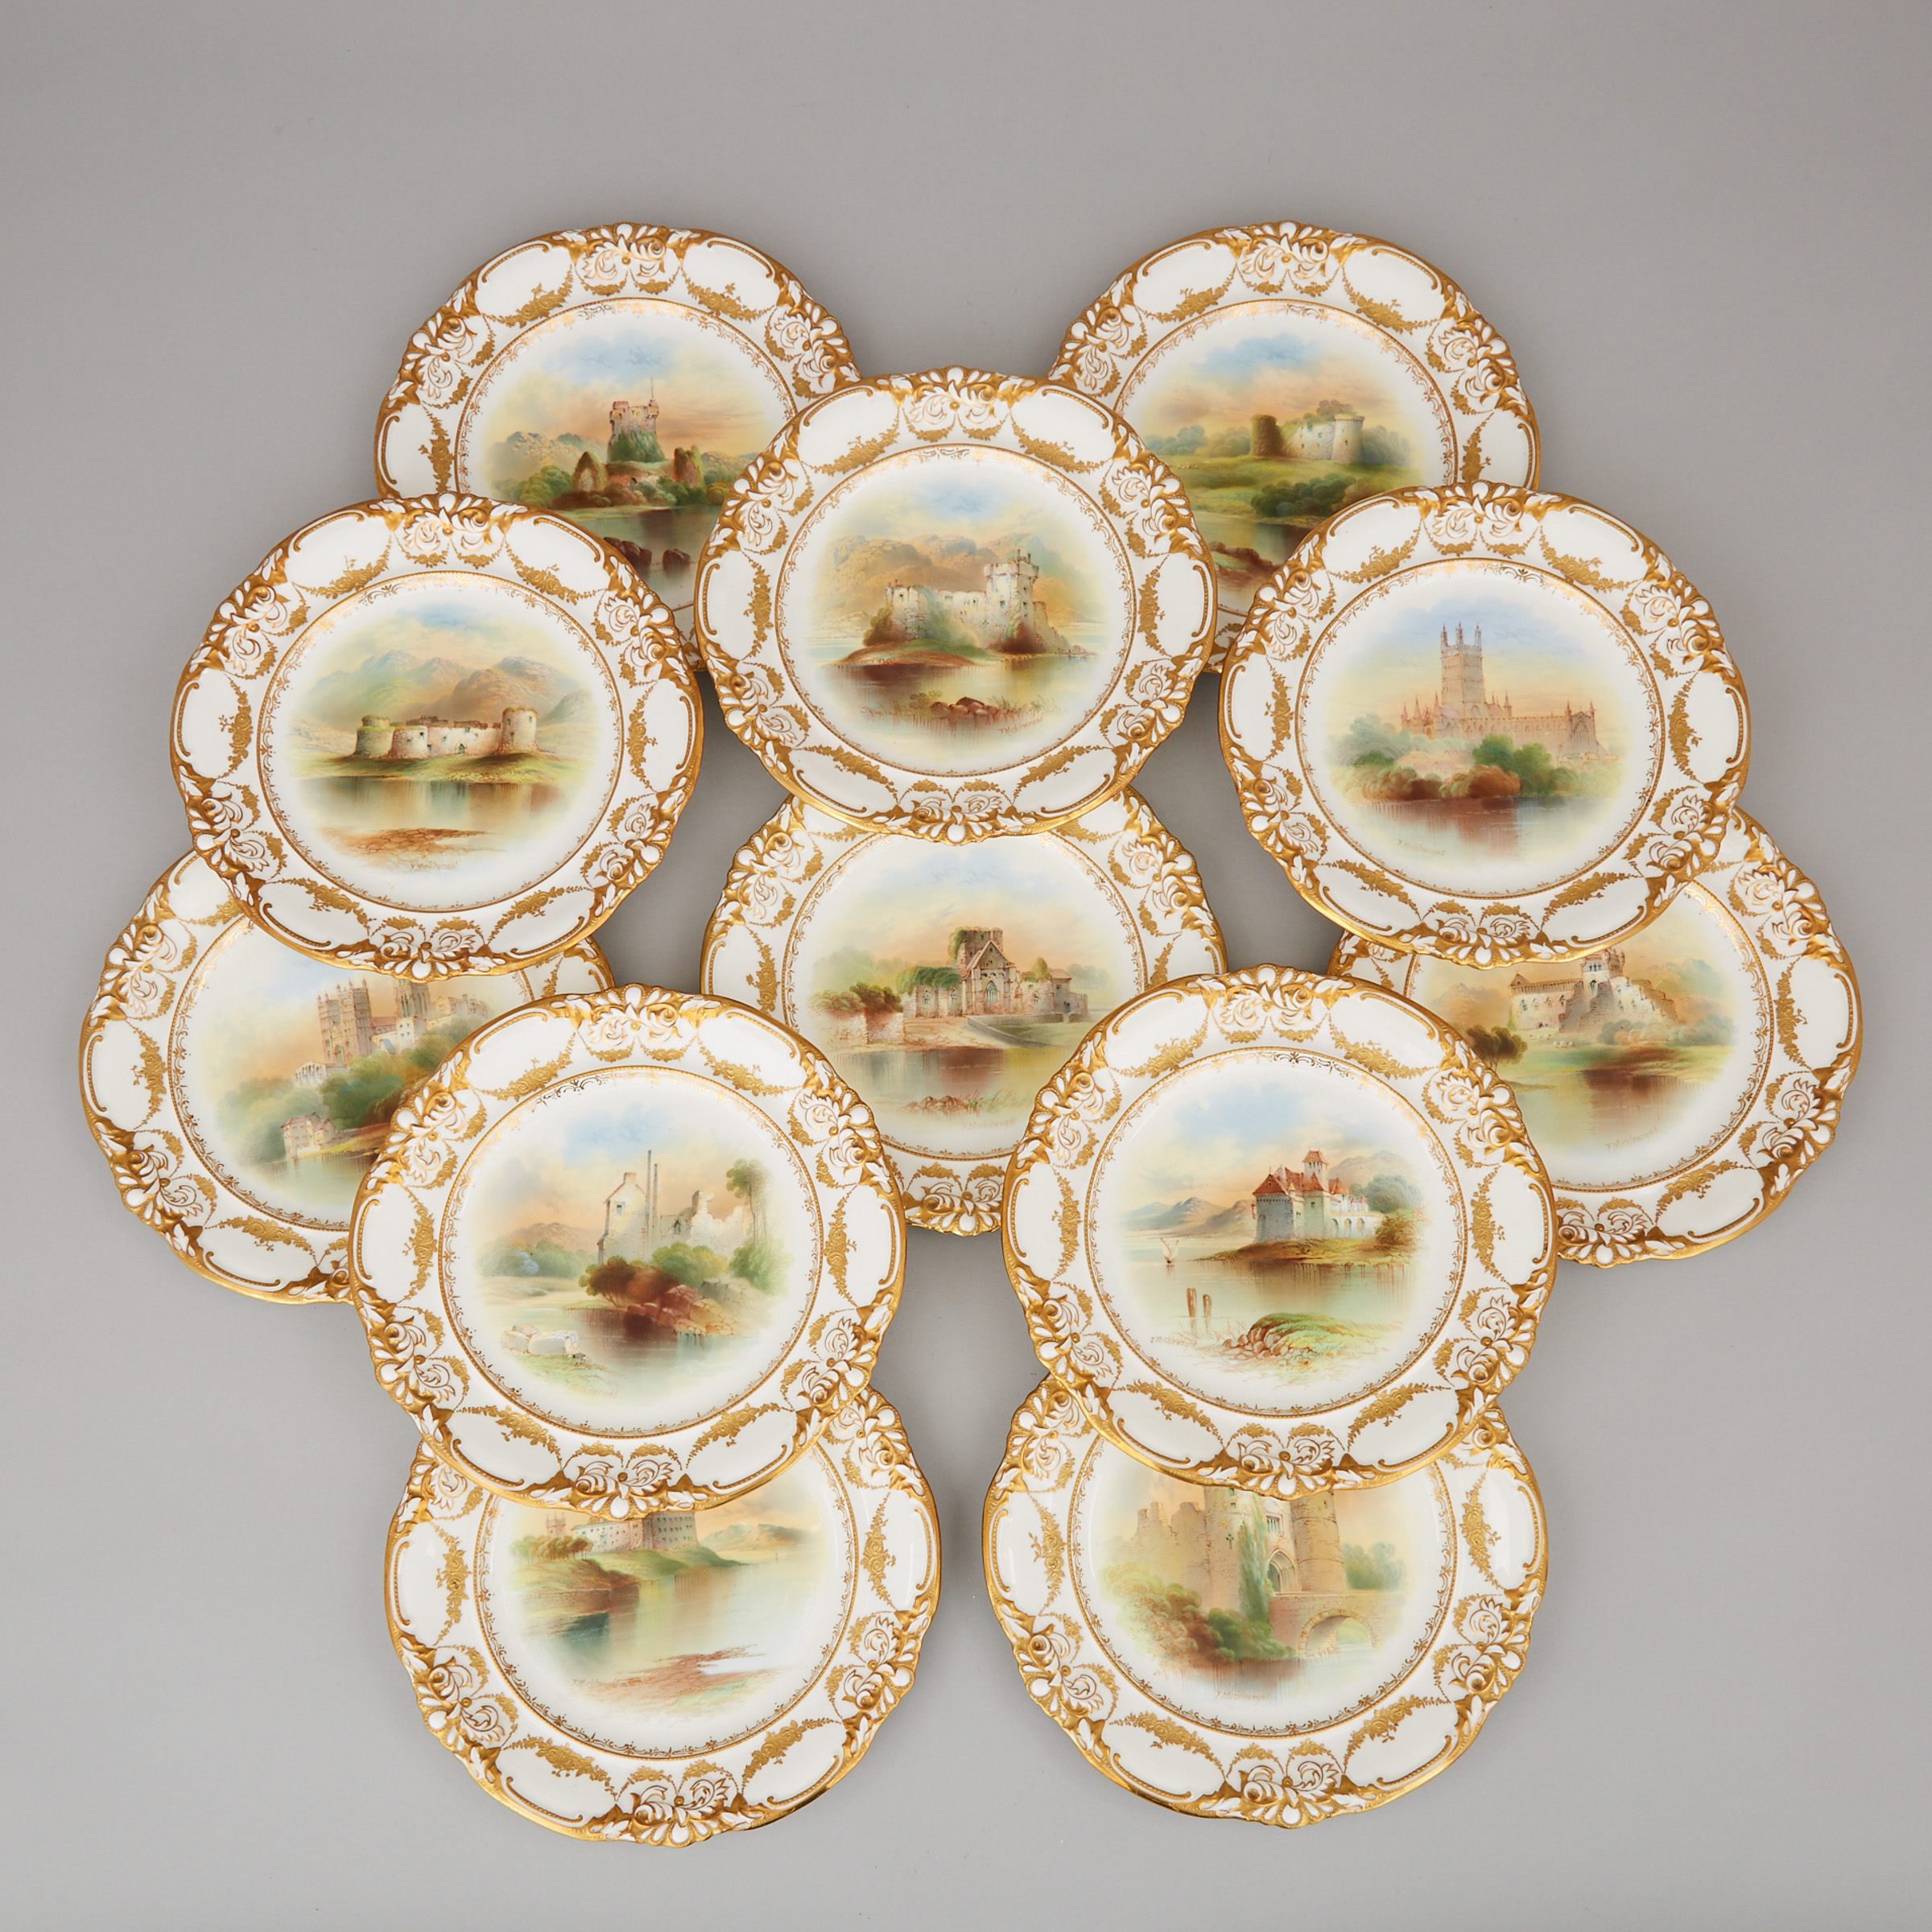 Set of Twelve Hammersley Topographical Dessert Plates, F. Micklewright, early 20th century